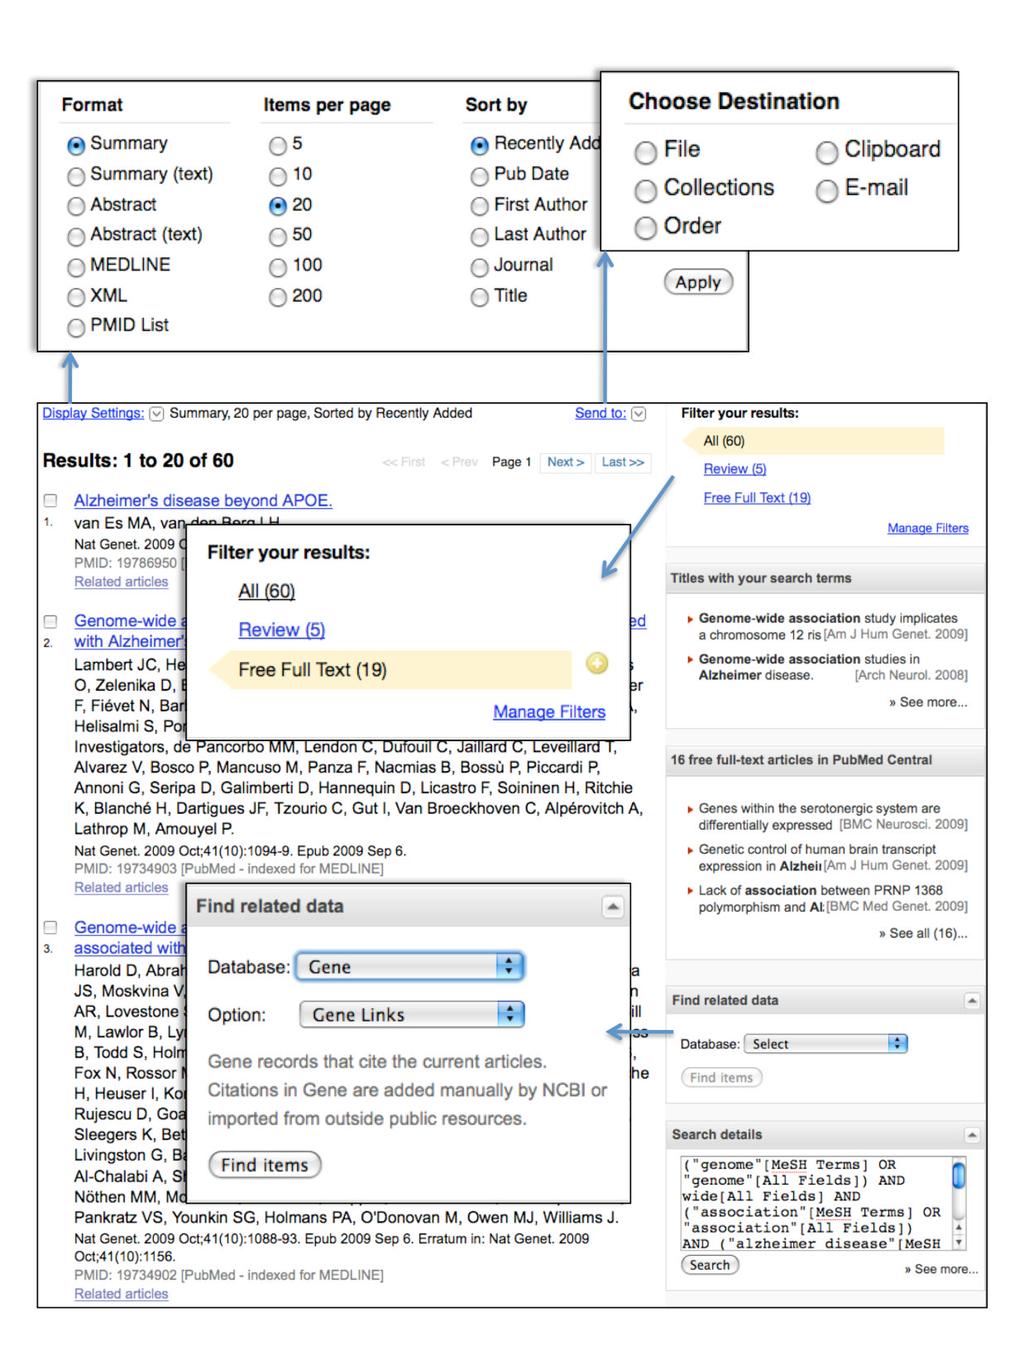 Page 9 Figure 3. The new PubMed results page. The Display Settings menu manages formatting, number displayed and sorting order. The Send to menu manages destinations for the results.